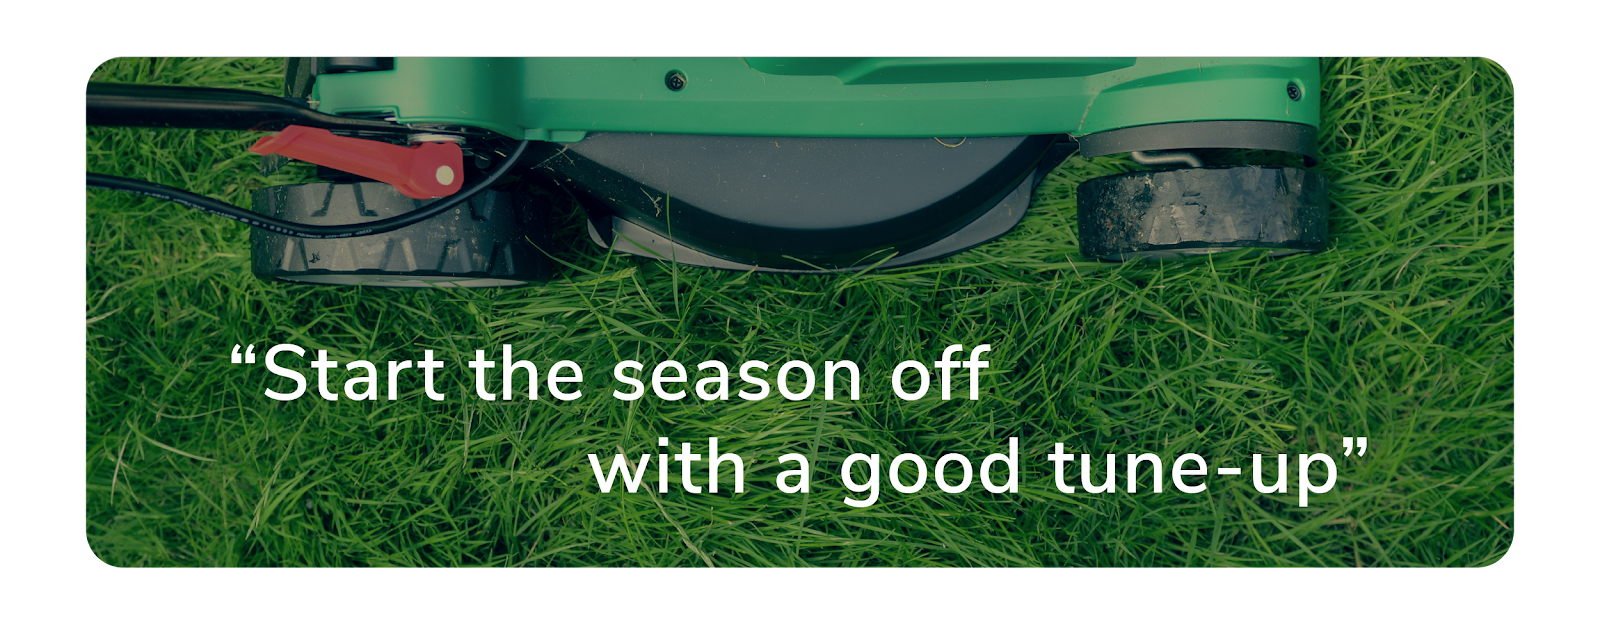 mower on grass that says start the season off with a good tune-up